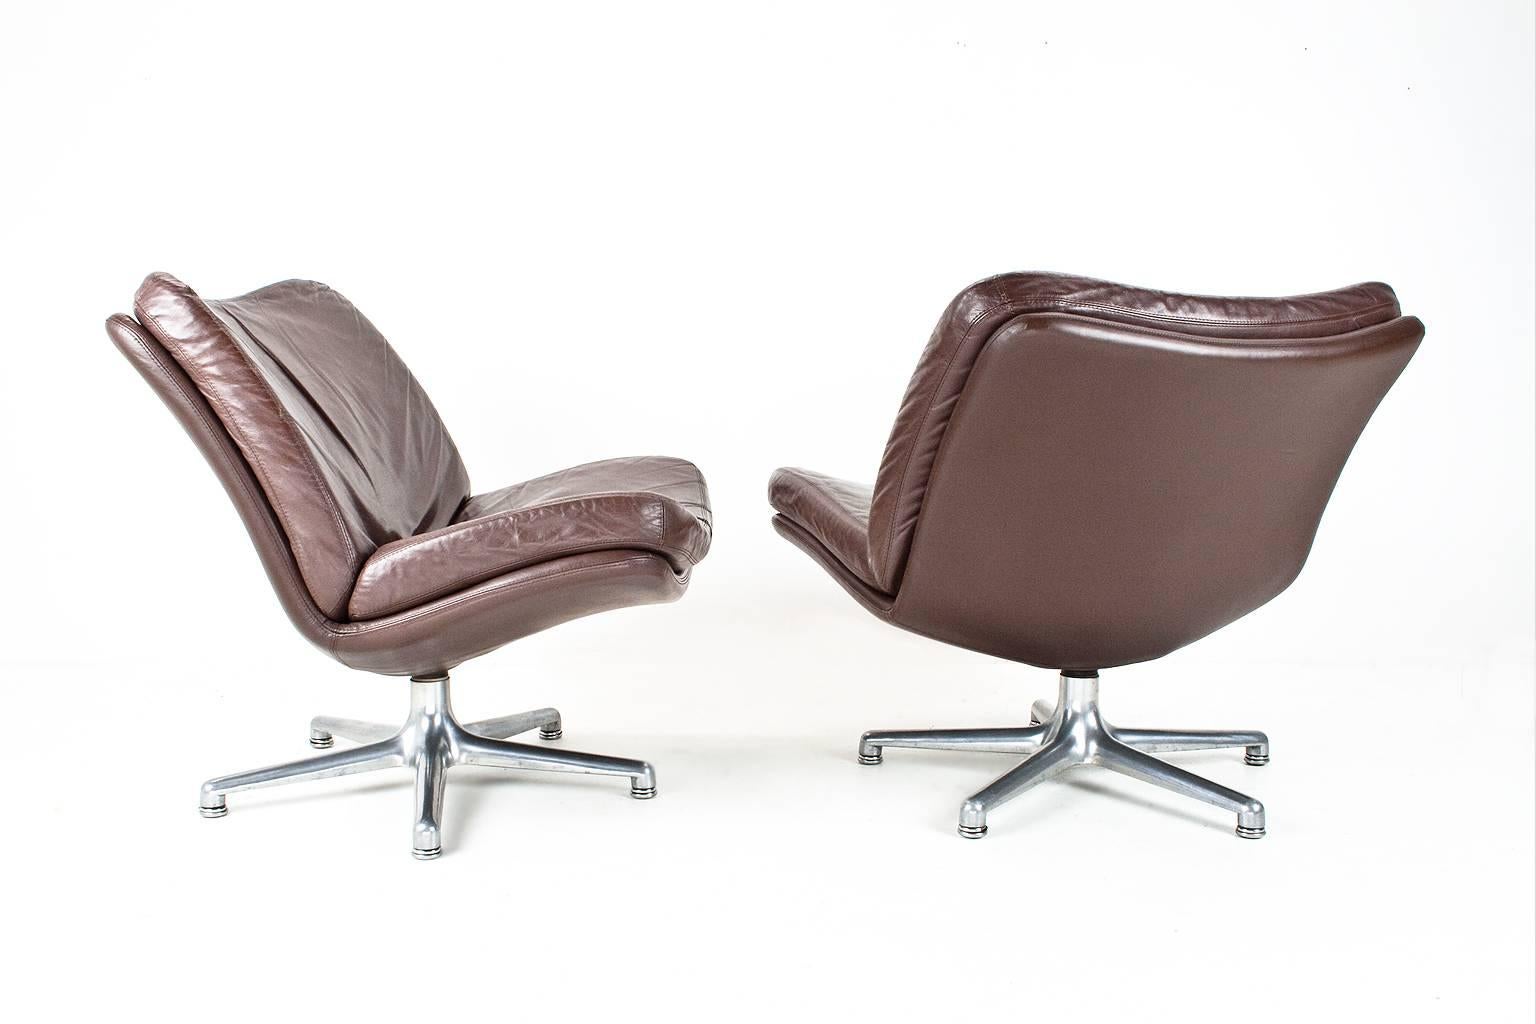 Original 1960s Dutch leather swivel lounge chairs by Geoffrey Harcourt for Artifort (NL). The items are in very good condition, comfortable and beautiful. Brown Leather and chromed metal foot in very good condition. 

Geoffrey D. Harcourt (1935)